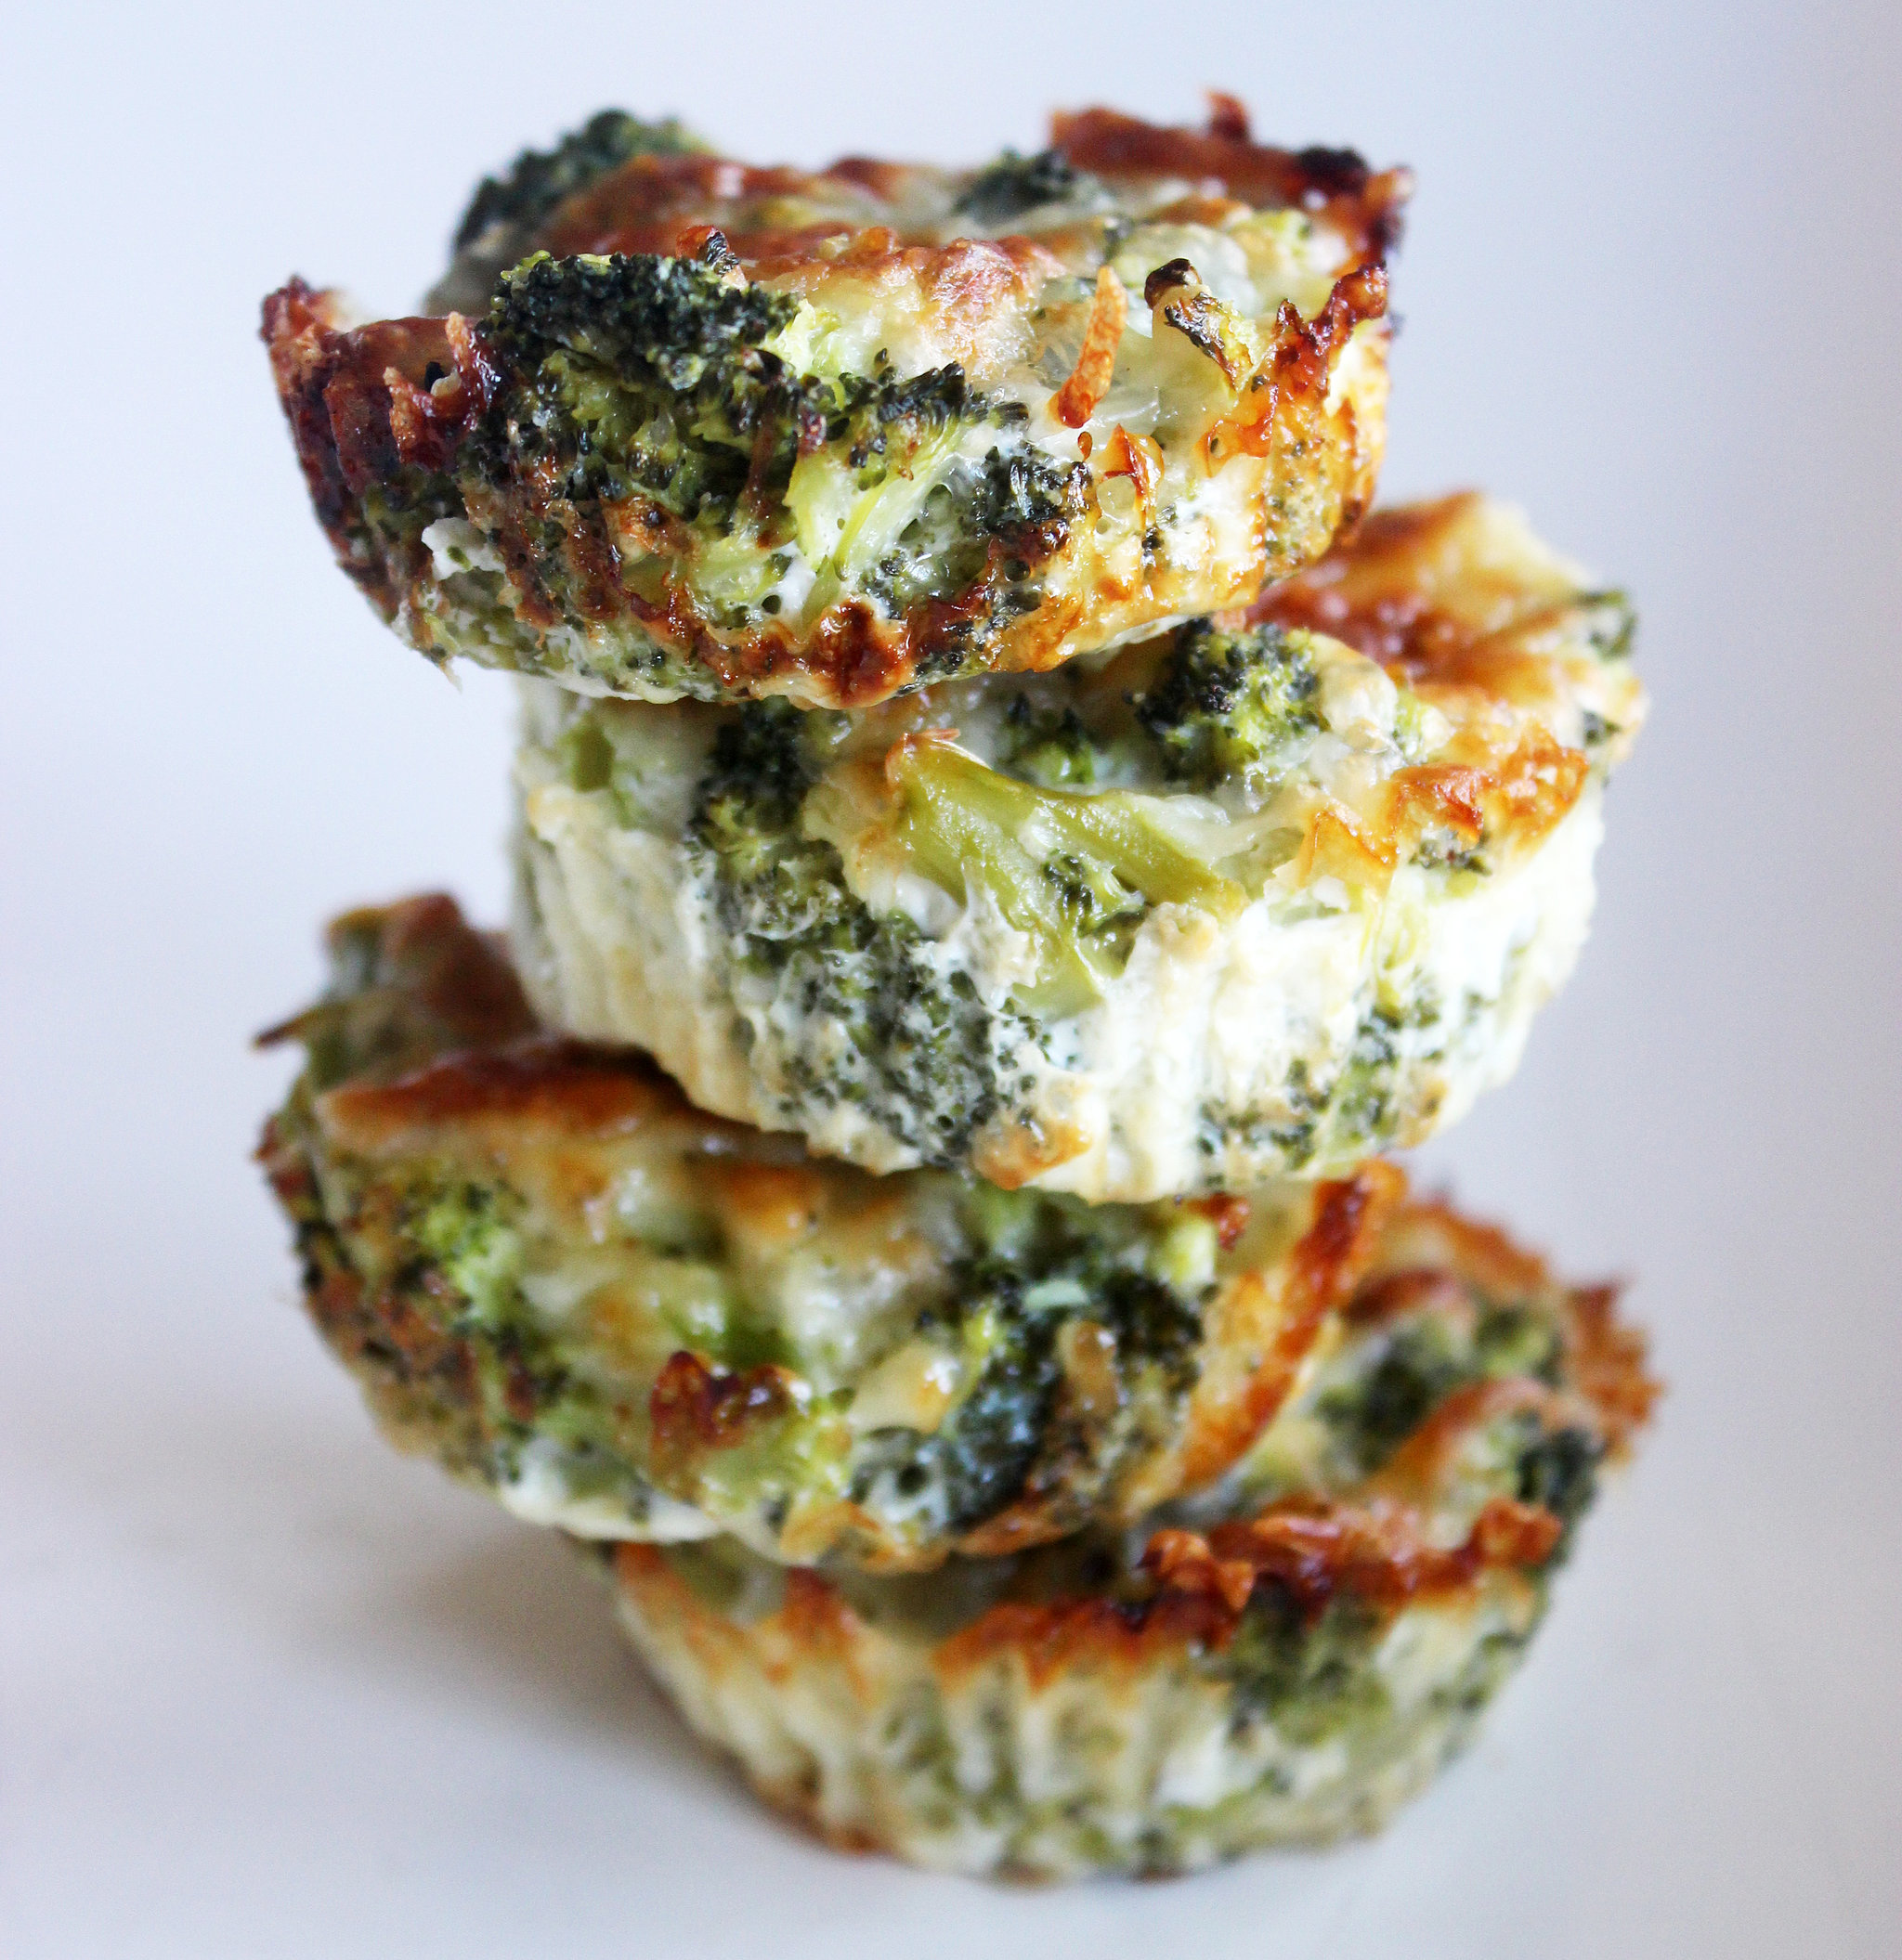 Craving Broccoli Cheese Soup? Bake These Healthy Cheesy Bites Instead